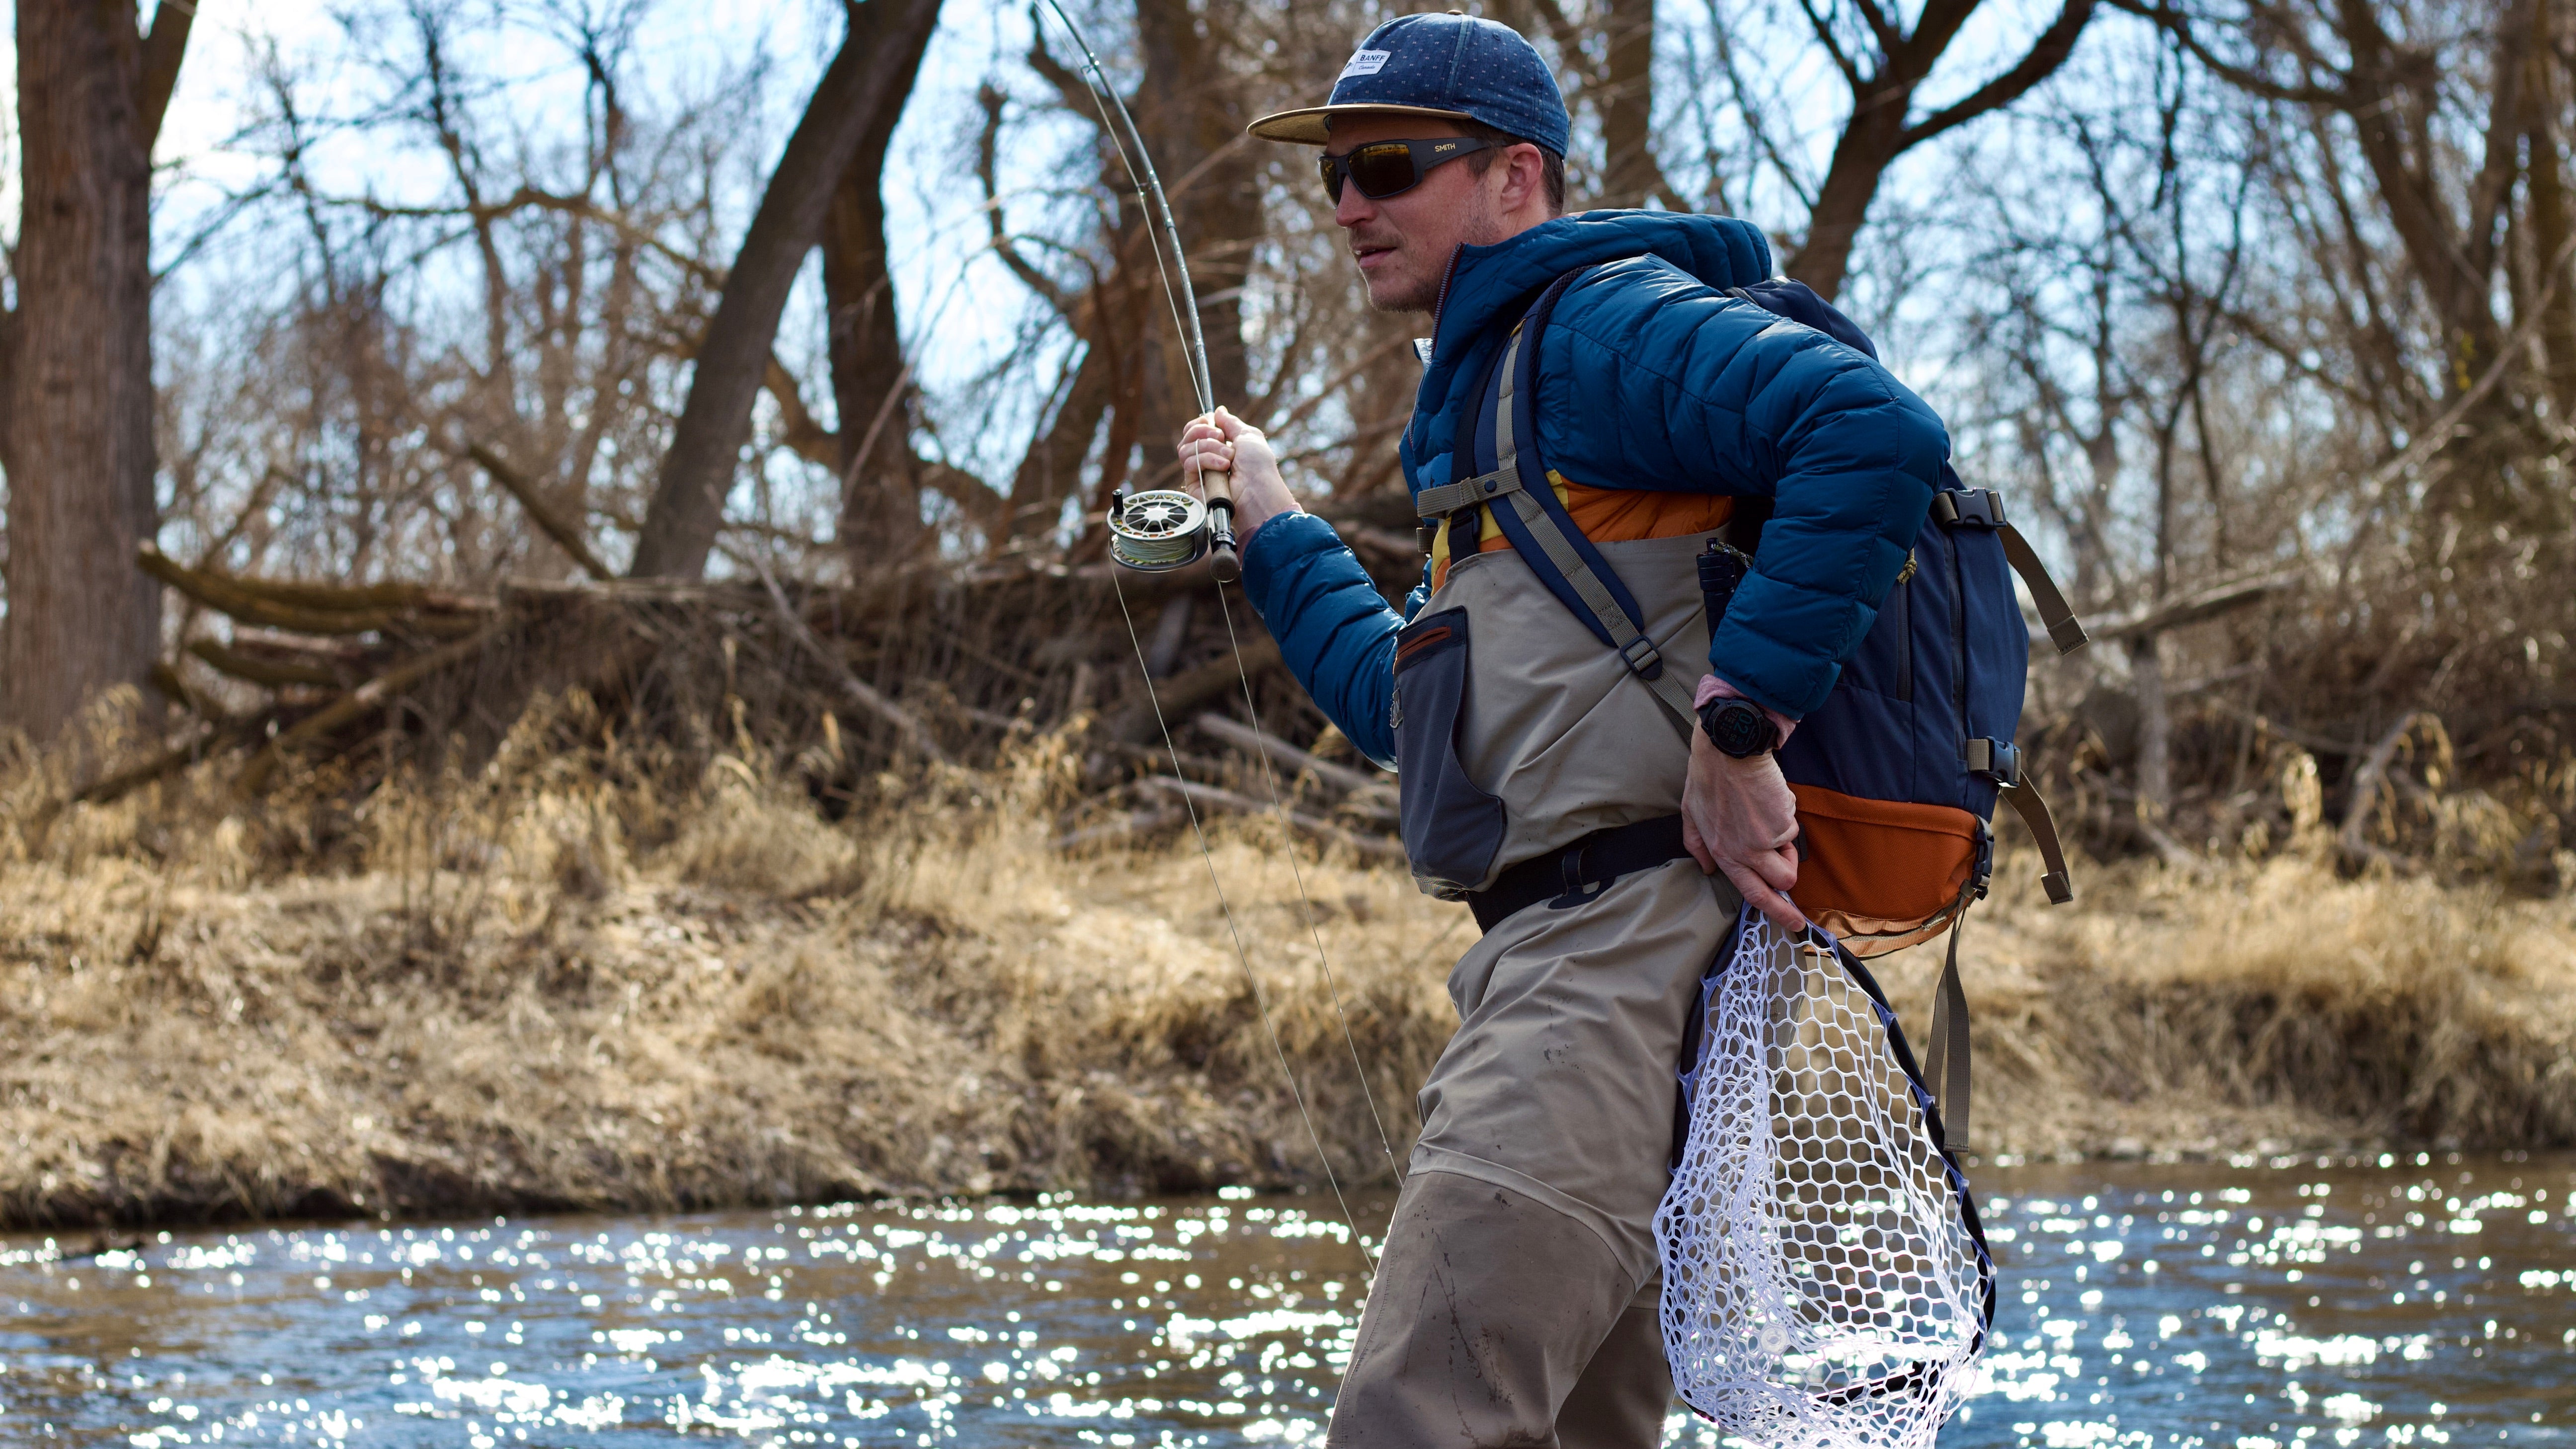 The Broder Net Clip - The Ultimate Net Holder for Fly Fishing